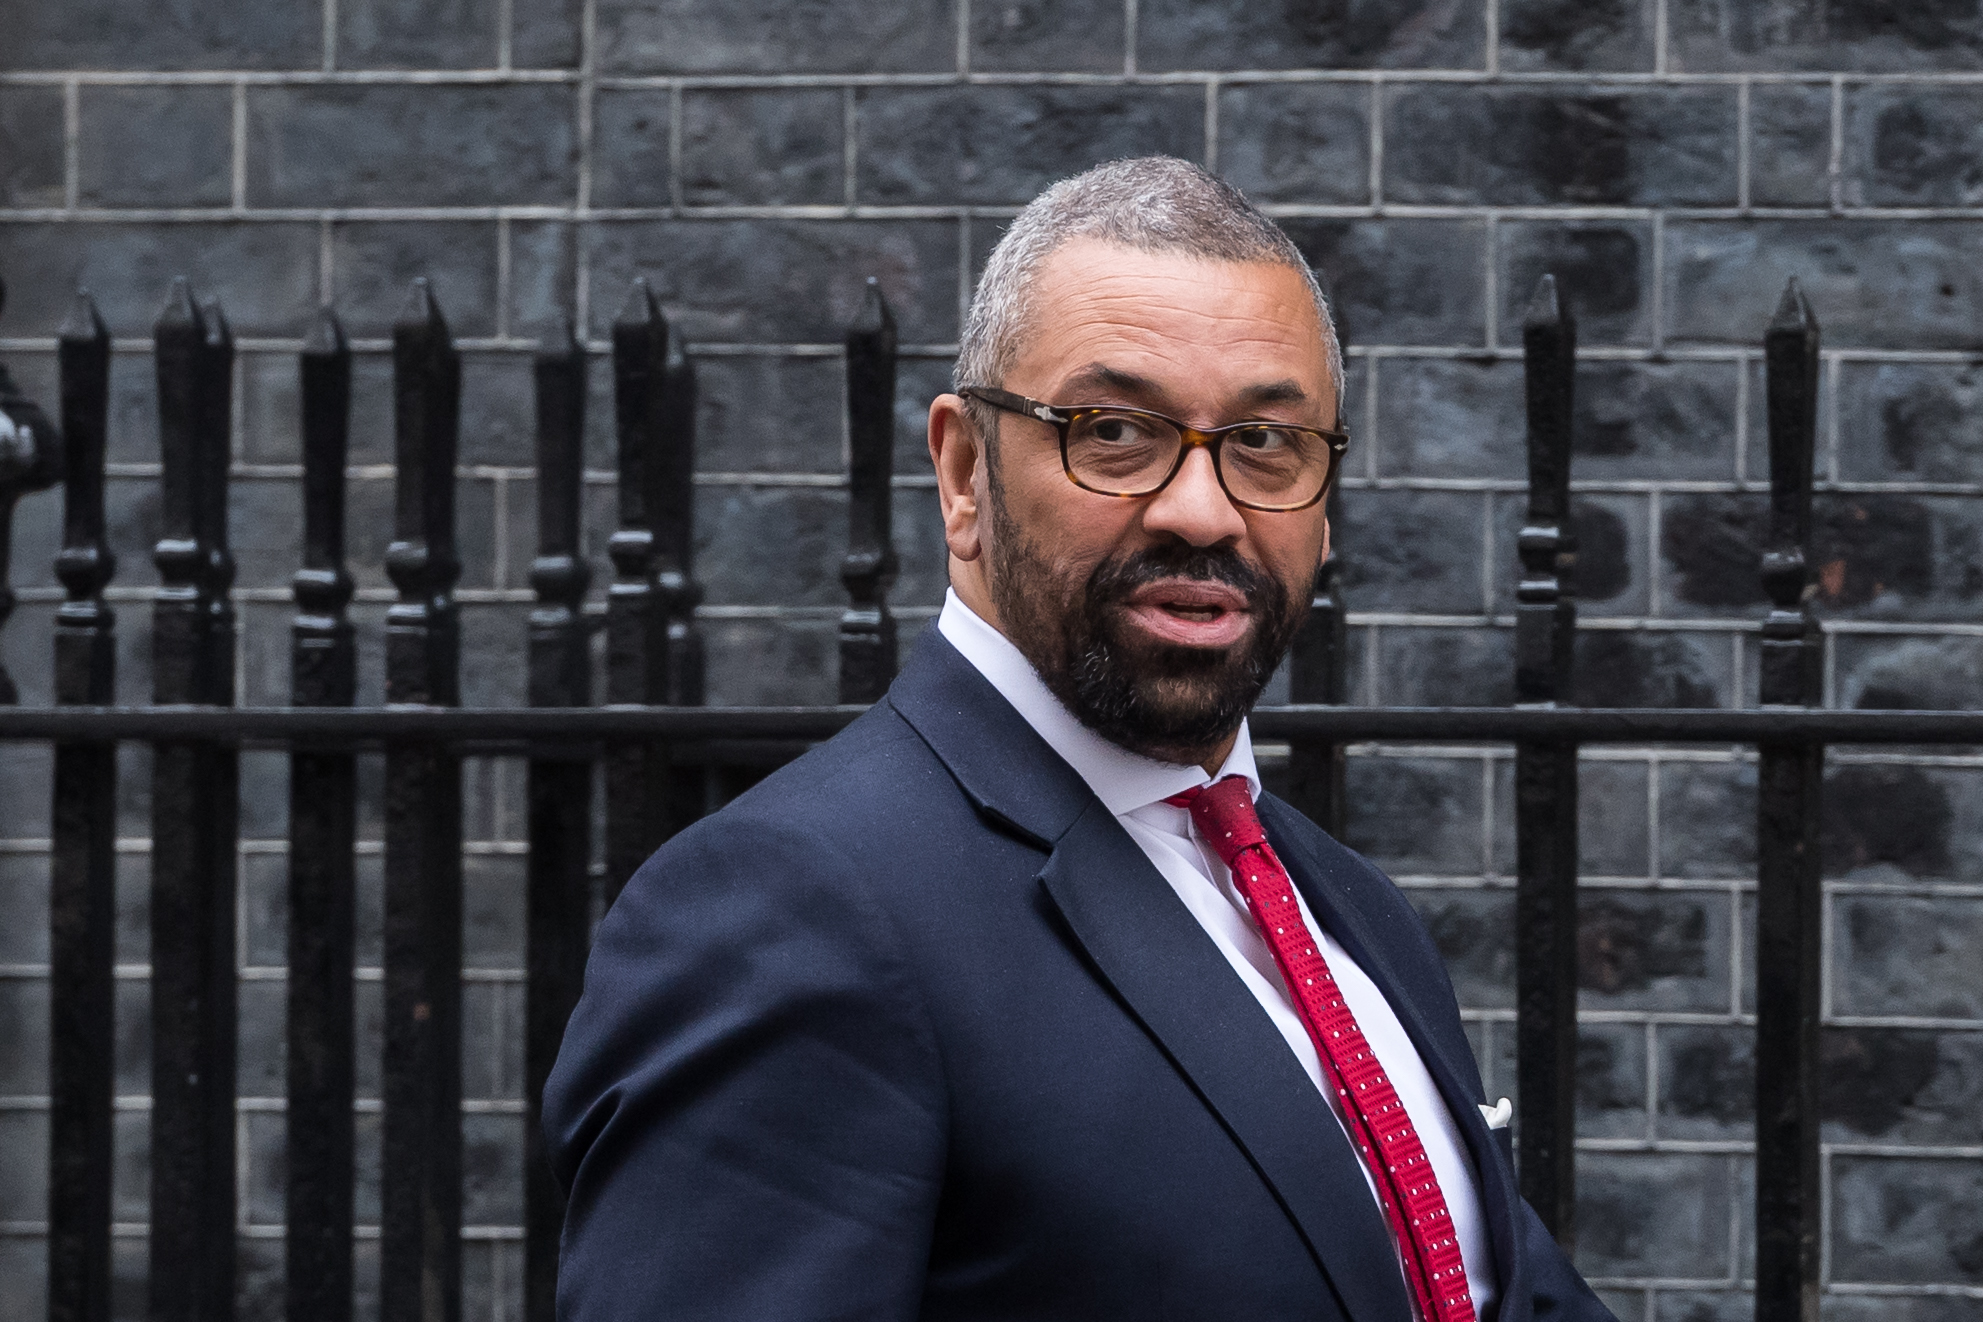 UK Foreign Secretary James Cleverly arrives at 10 Downing Street in London on May 2.